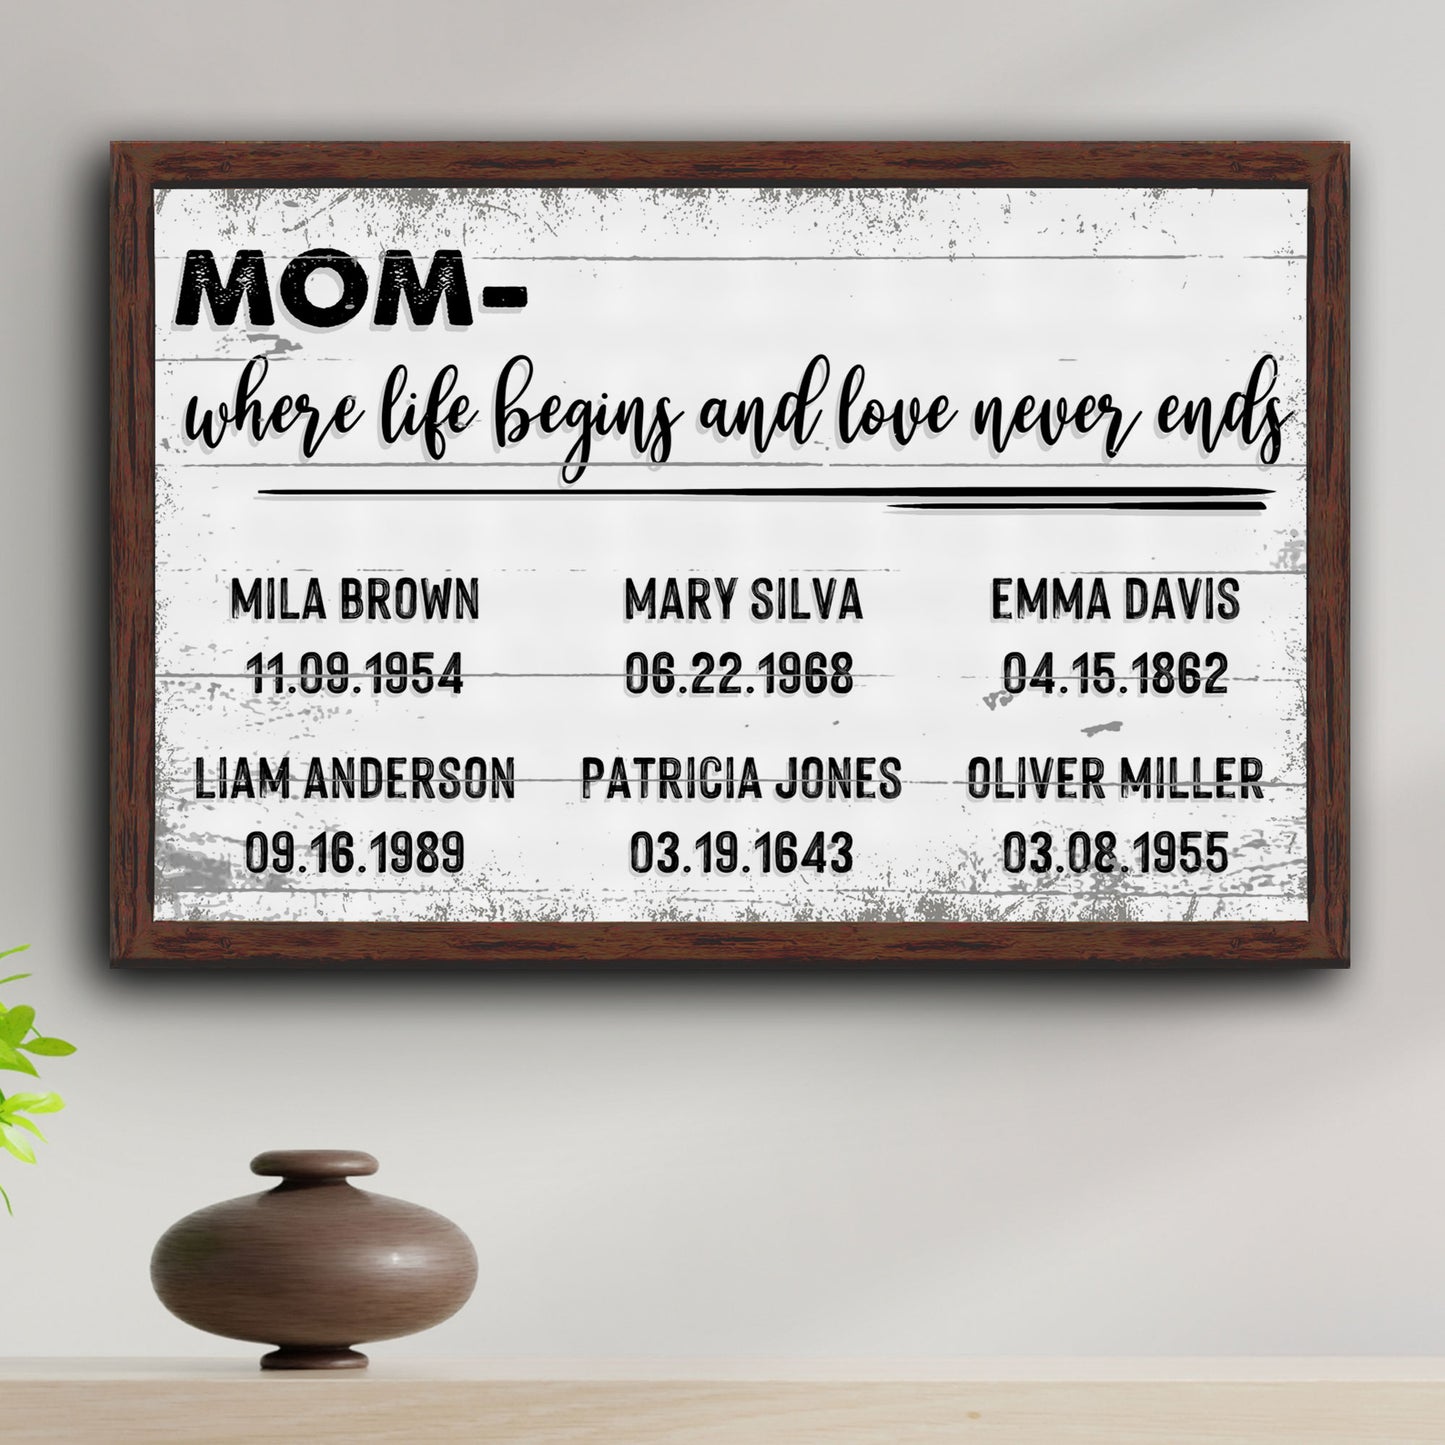 Mom, Love Never Ends Happy Mother's Day Sign - Image by Tailored Canvases